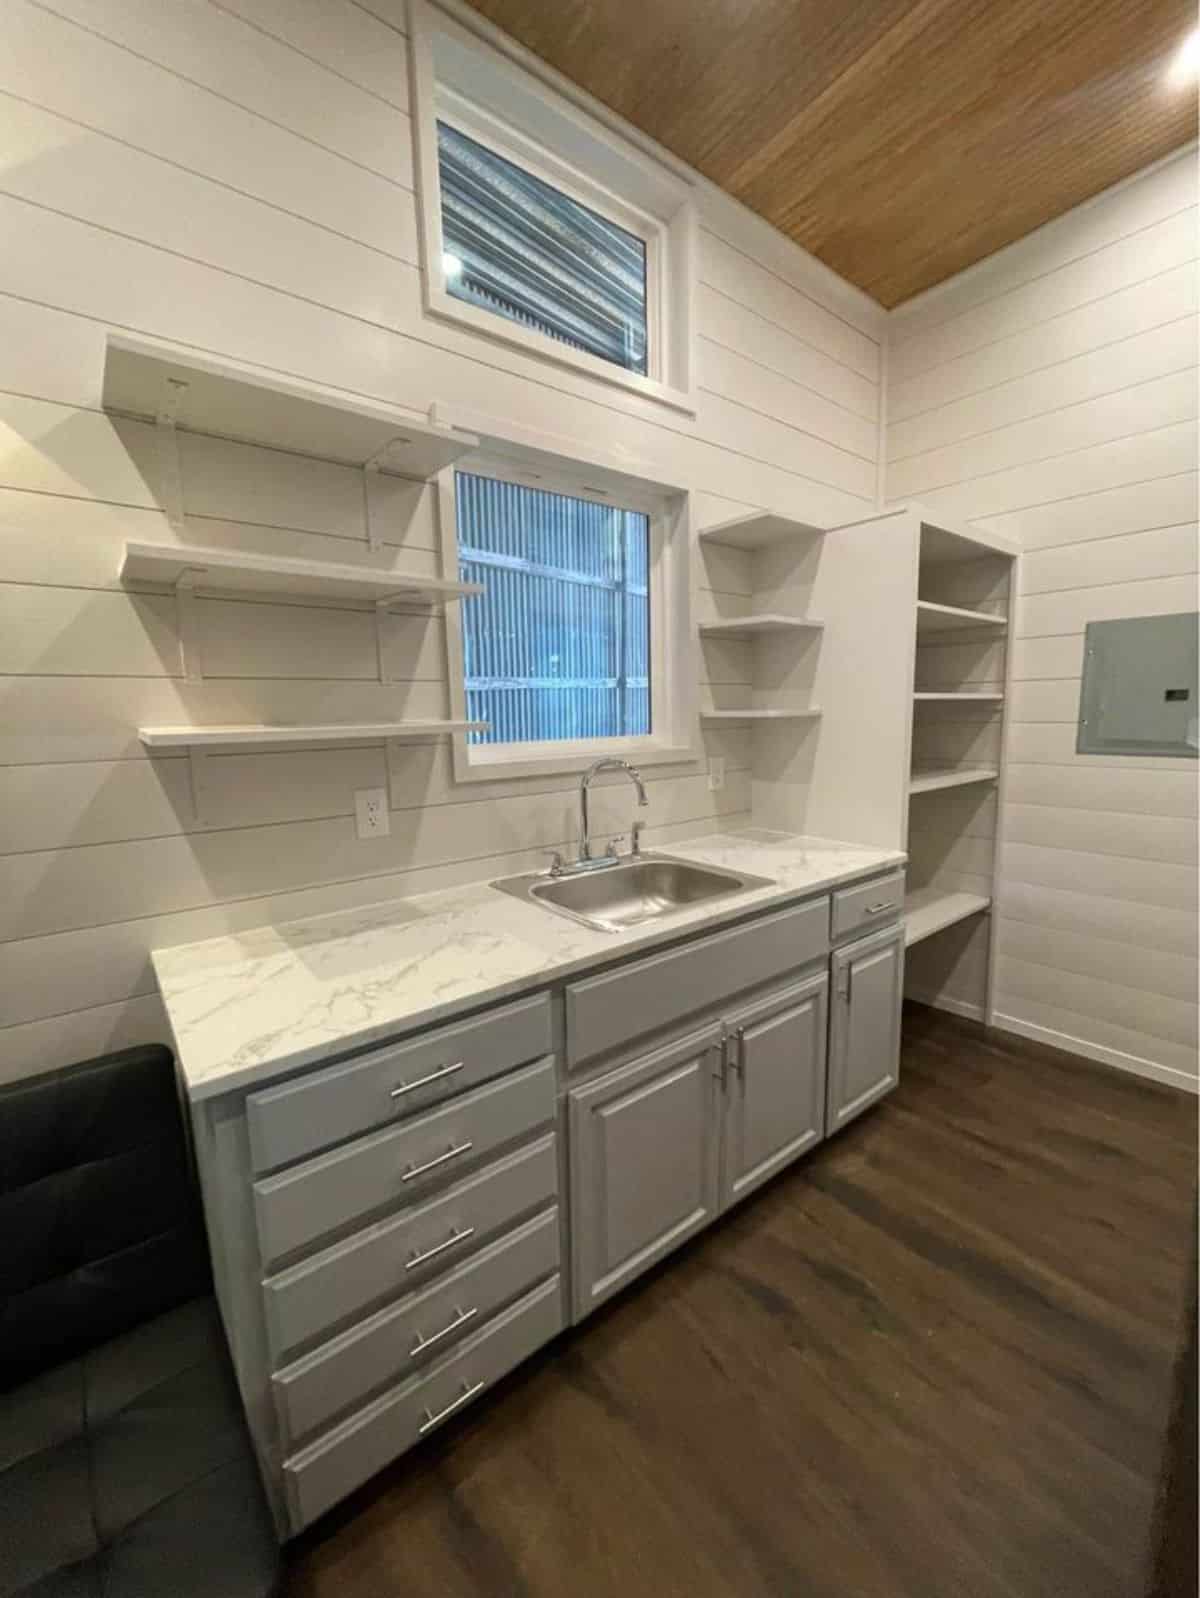 Full white themed Kitchen area of rustic 30’ tiny house